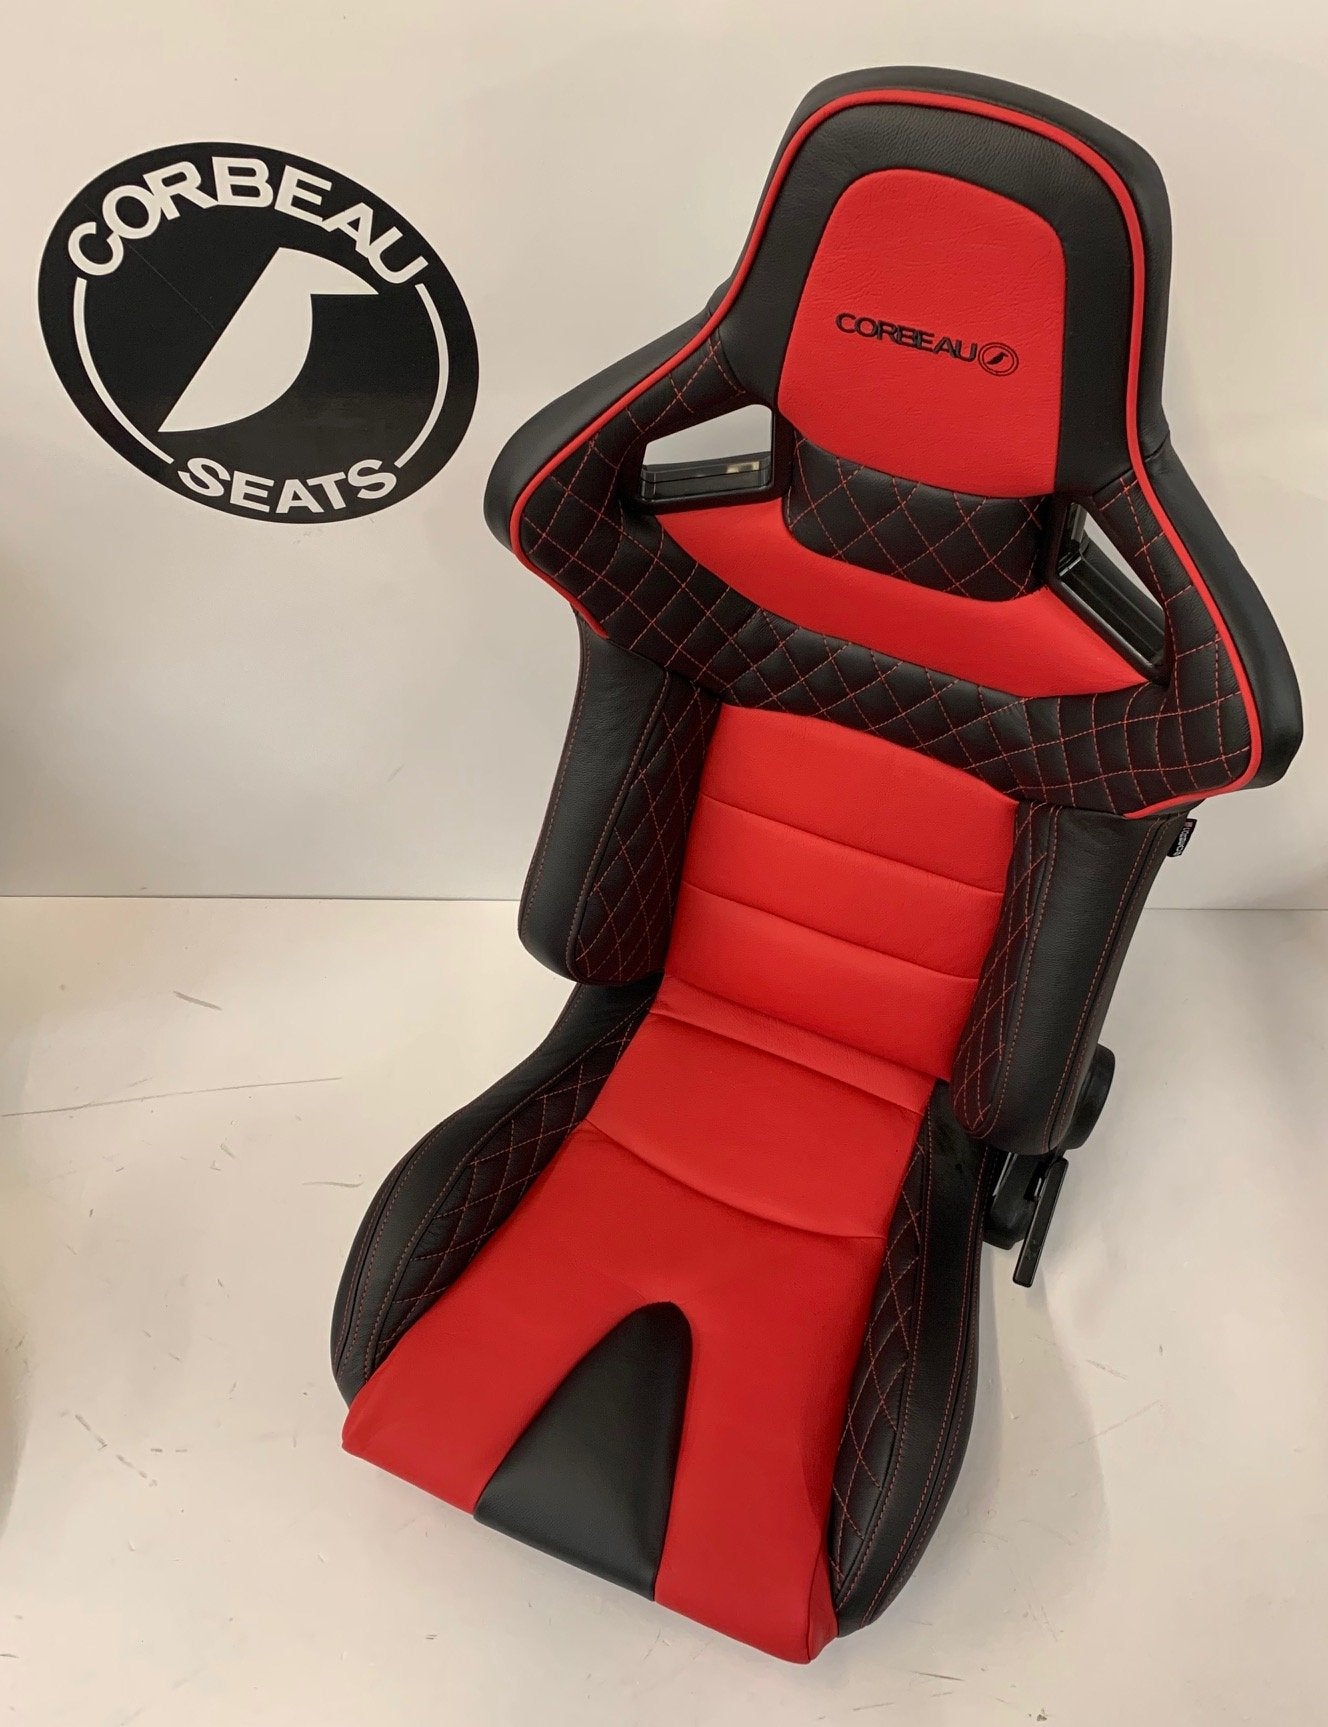 Corbeau Sports Seat for S550 Mustang